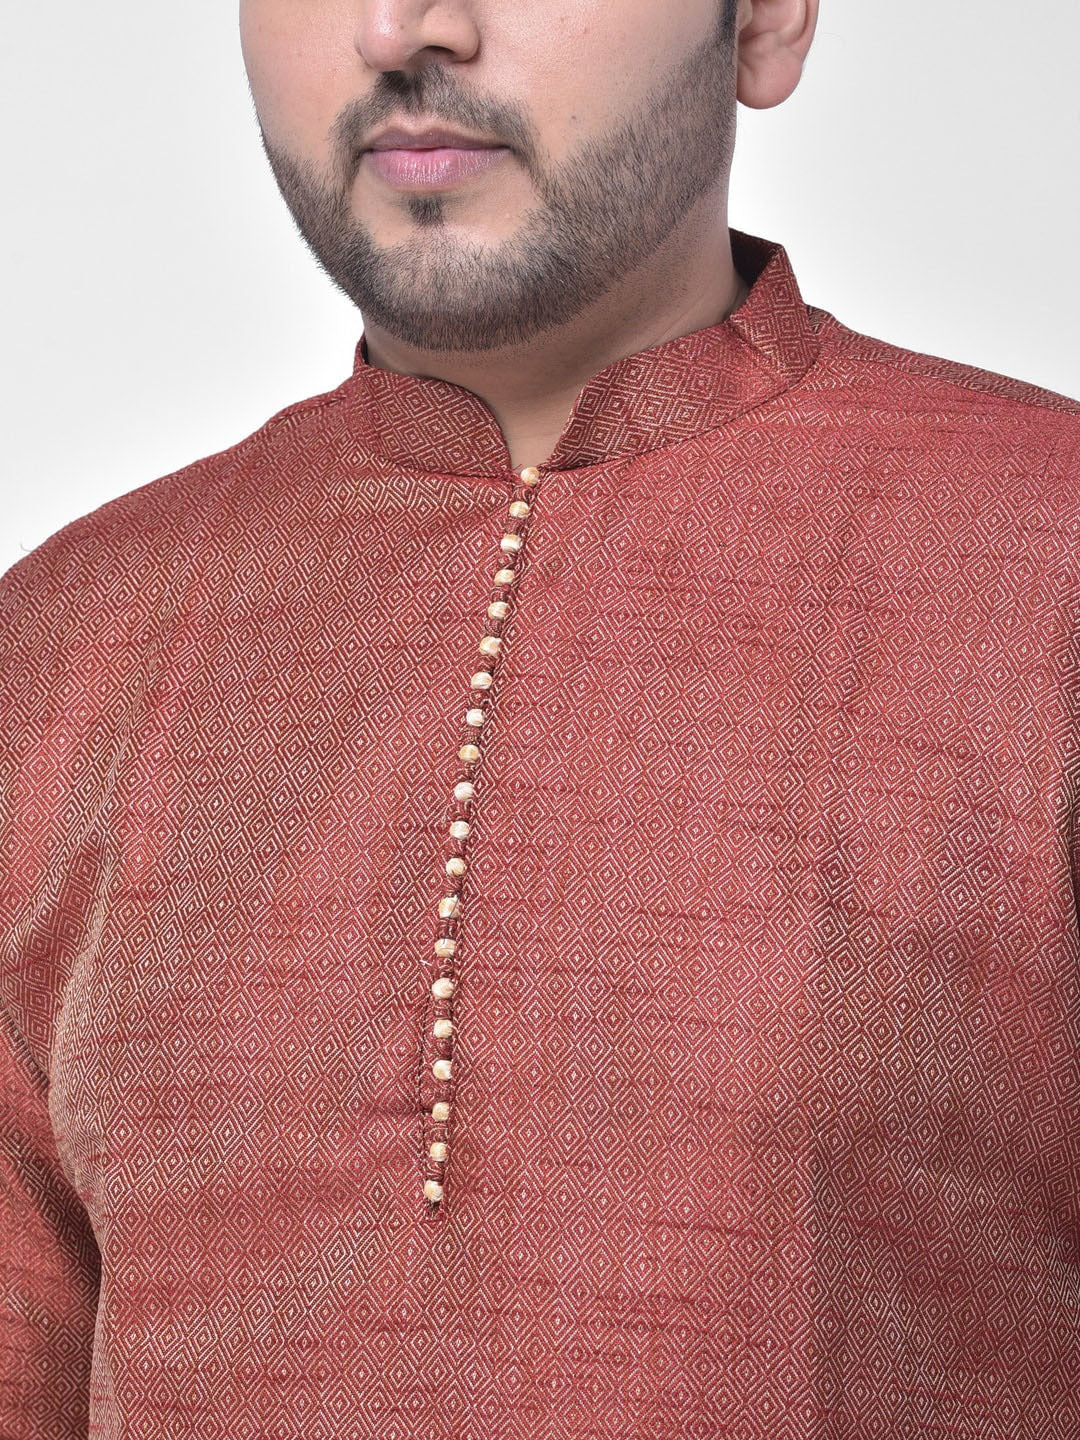 Rust Maroon Kurta Set Indian Clothing in Denver, CO, Aurora, CO, Boulder, CO, Fort Collins, CO, Colorado Springs, CO, Parker, CO, Highlands Ranch, CO, Cherry Creek, CO, Centennial, CO, and Longmont, CO. NATIONWIDE SHIPPING USA- India Fashion X